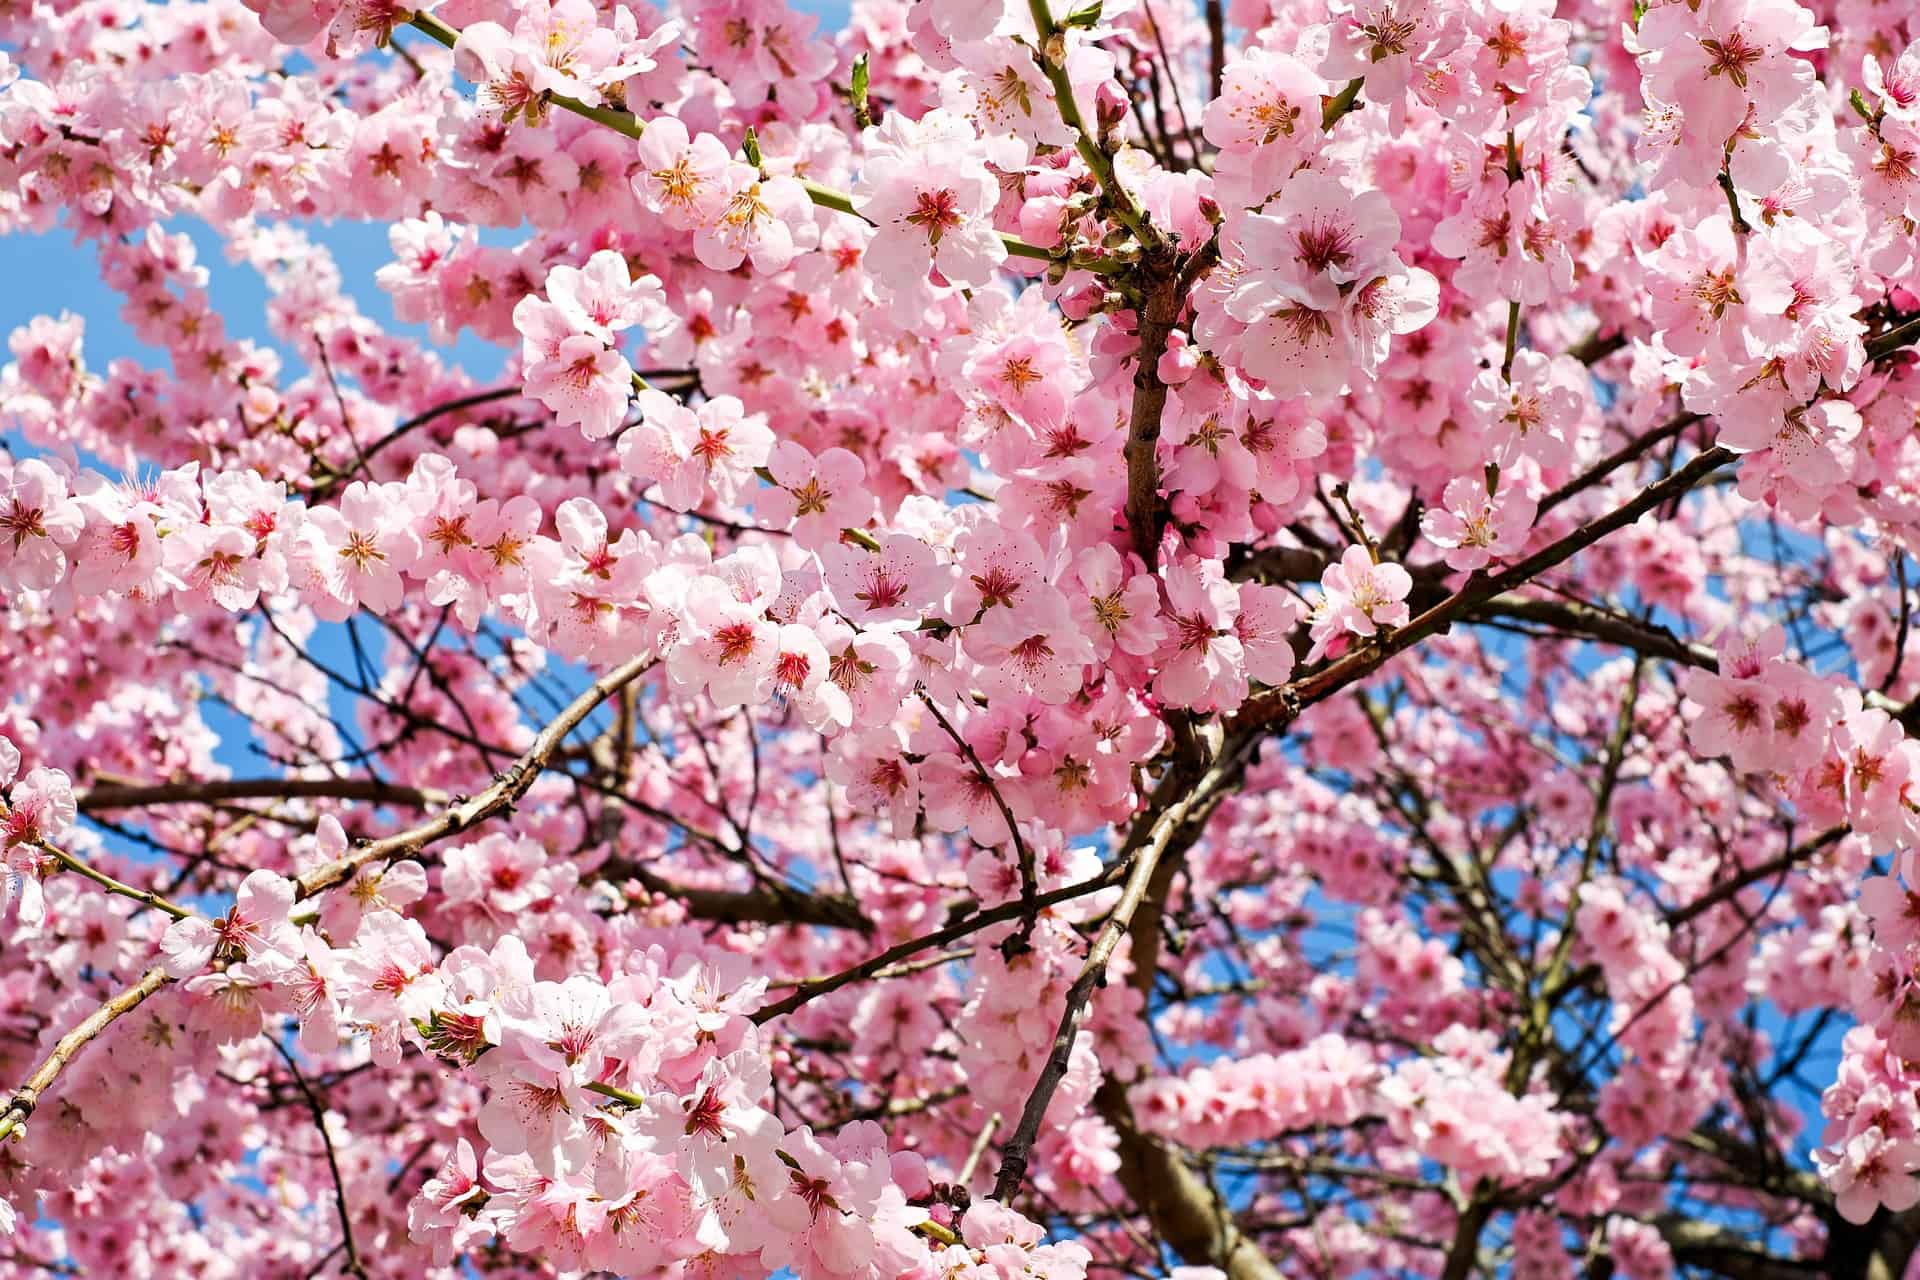 Sakura flowers or Cherry blossoms in full bloom on a pink